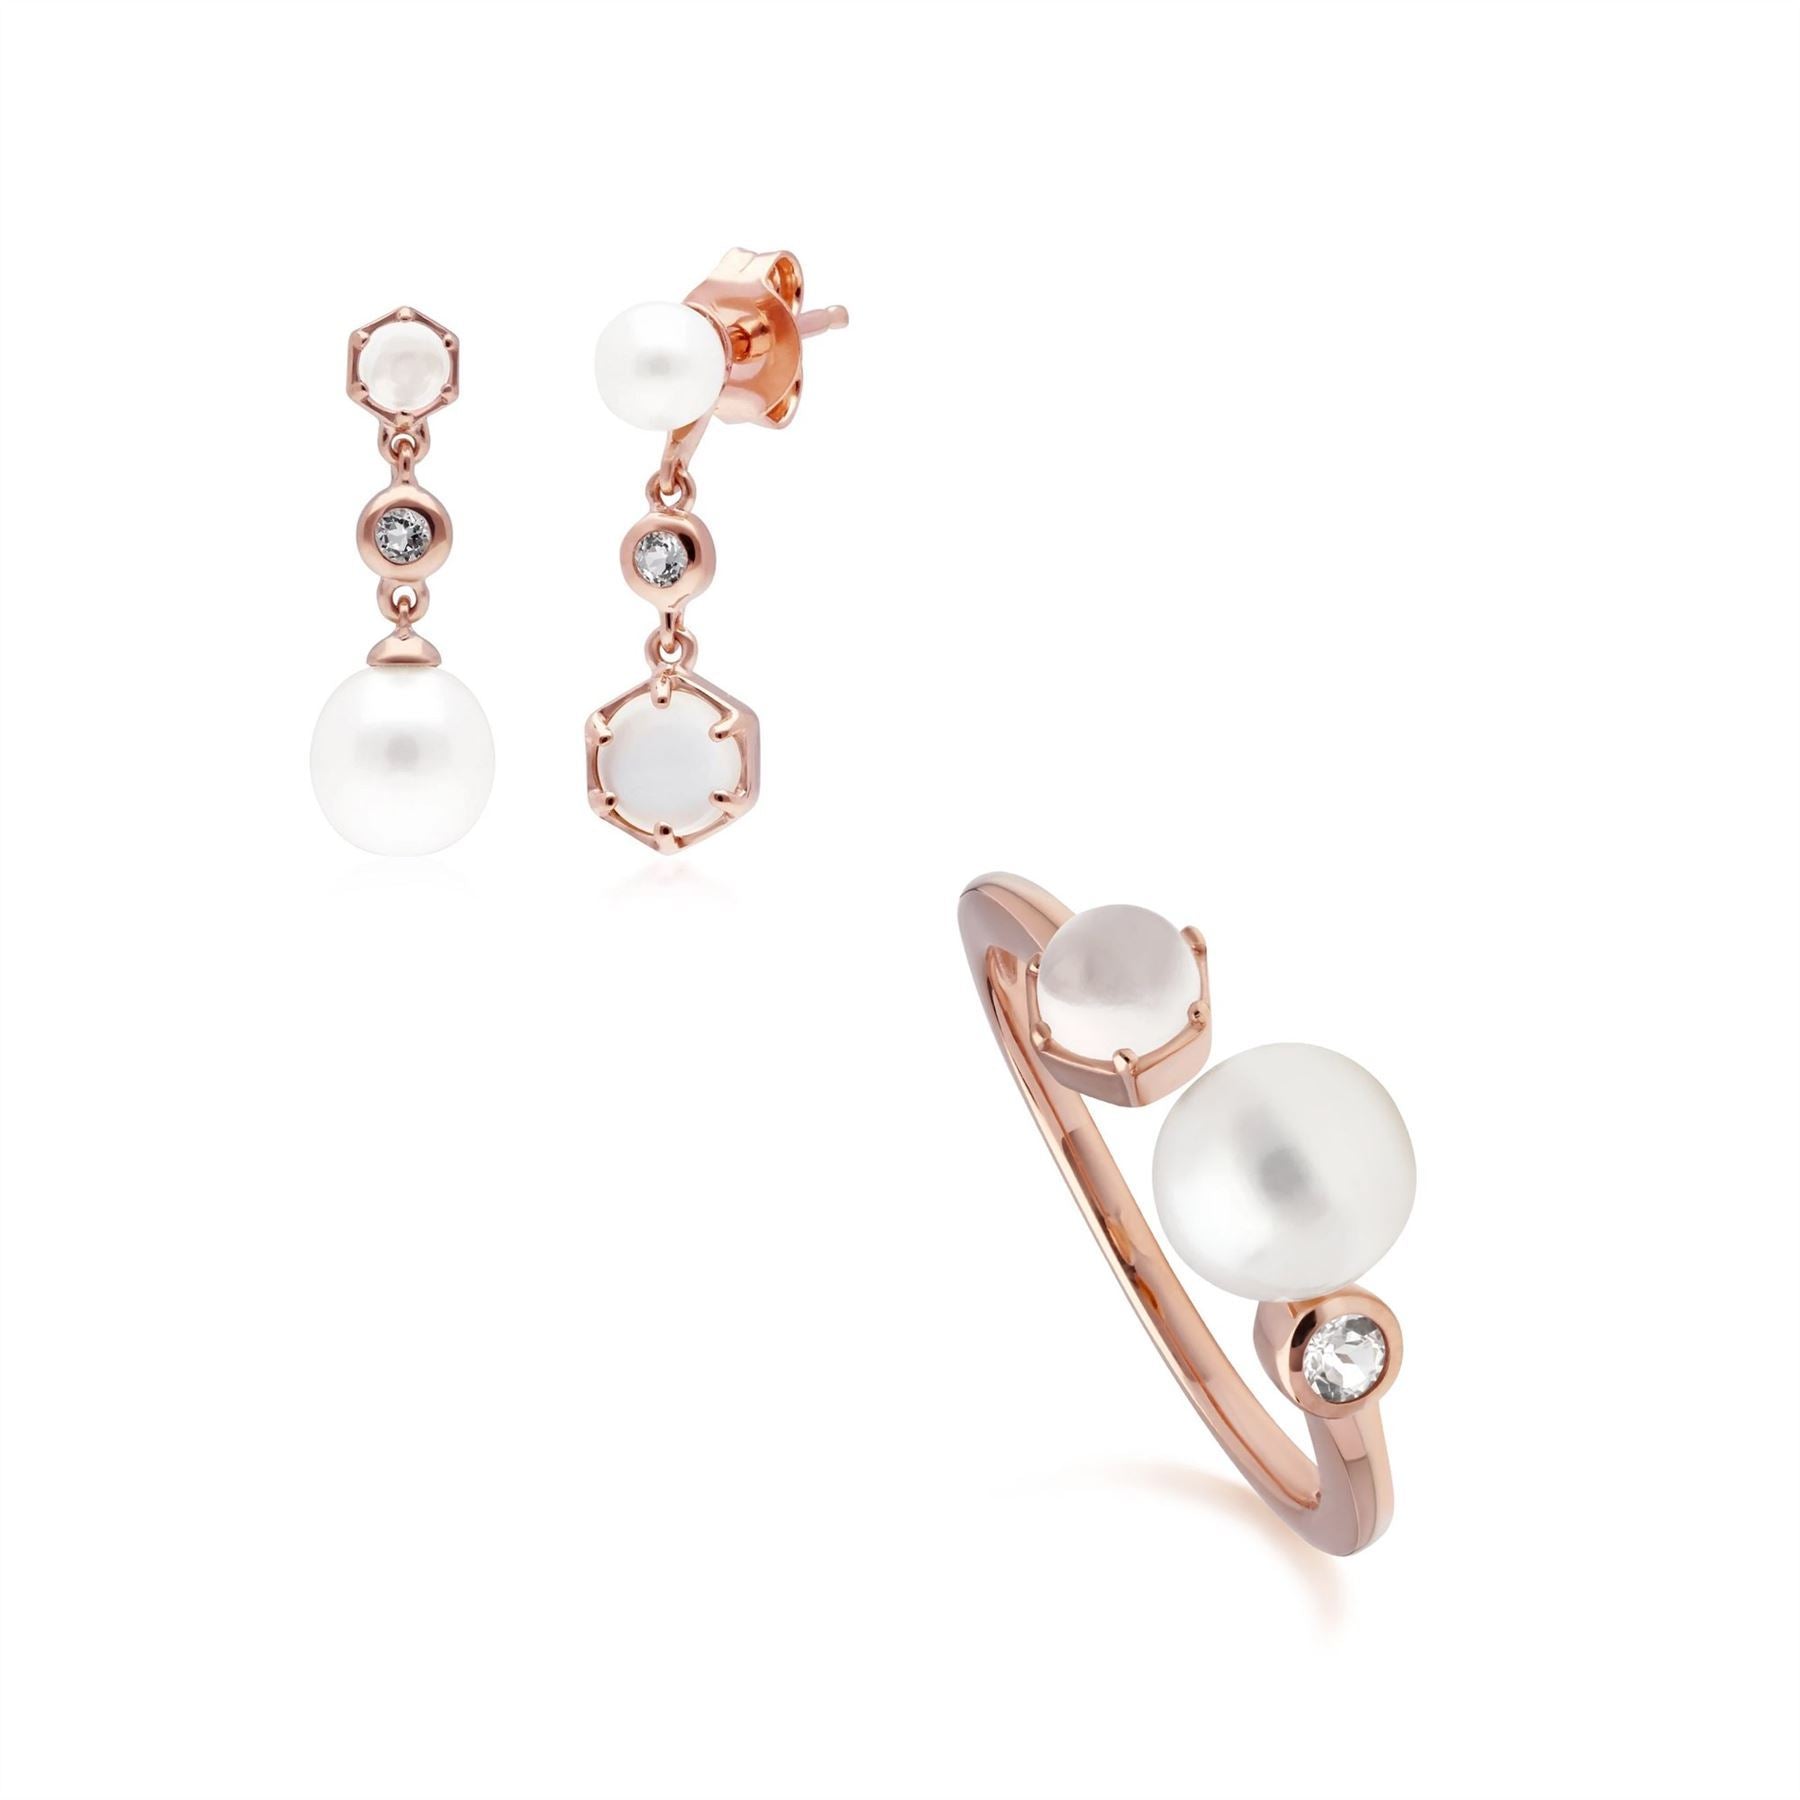 Modern Pearl, Moonstone & Topaz Earring & Ring Set in Rose Gold Plated Sterling Silver